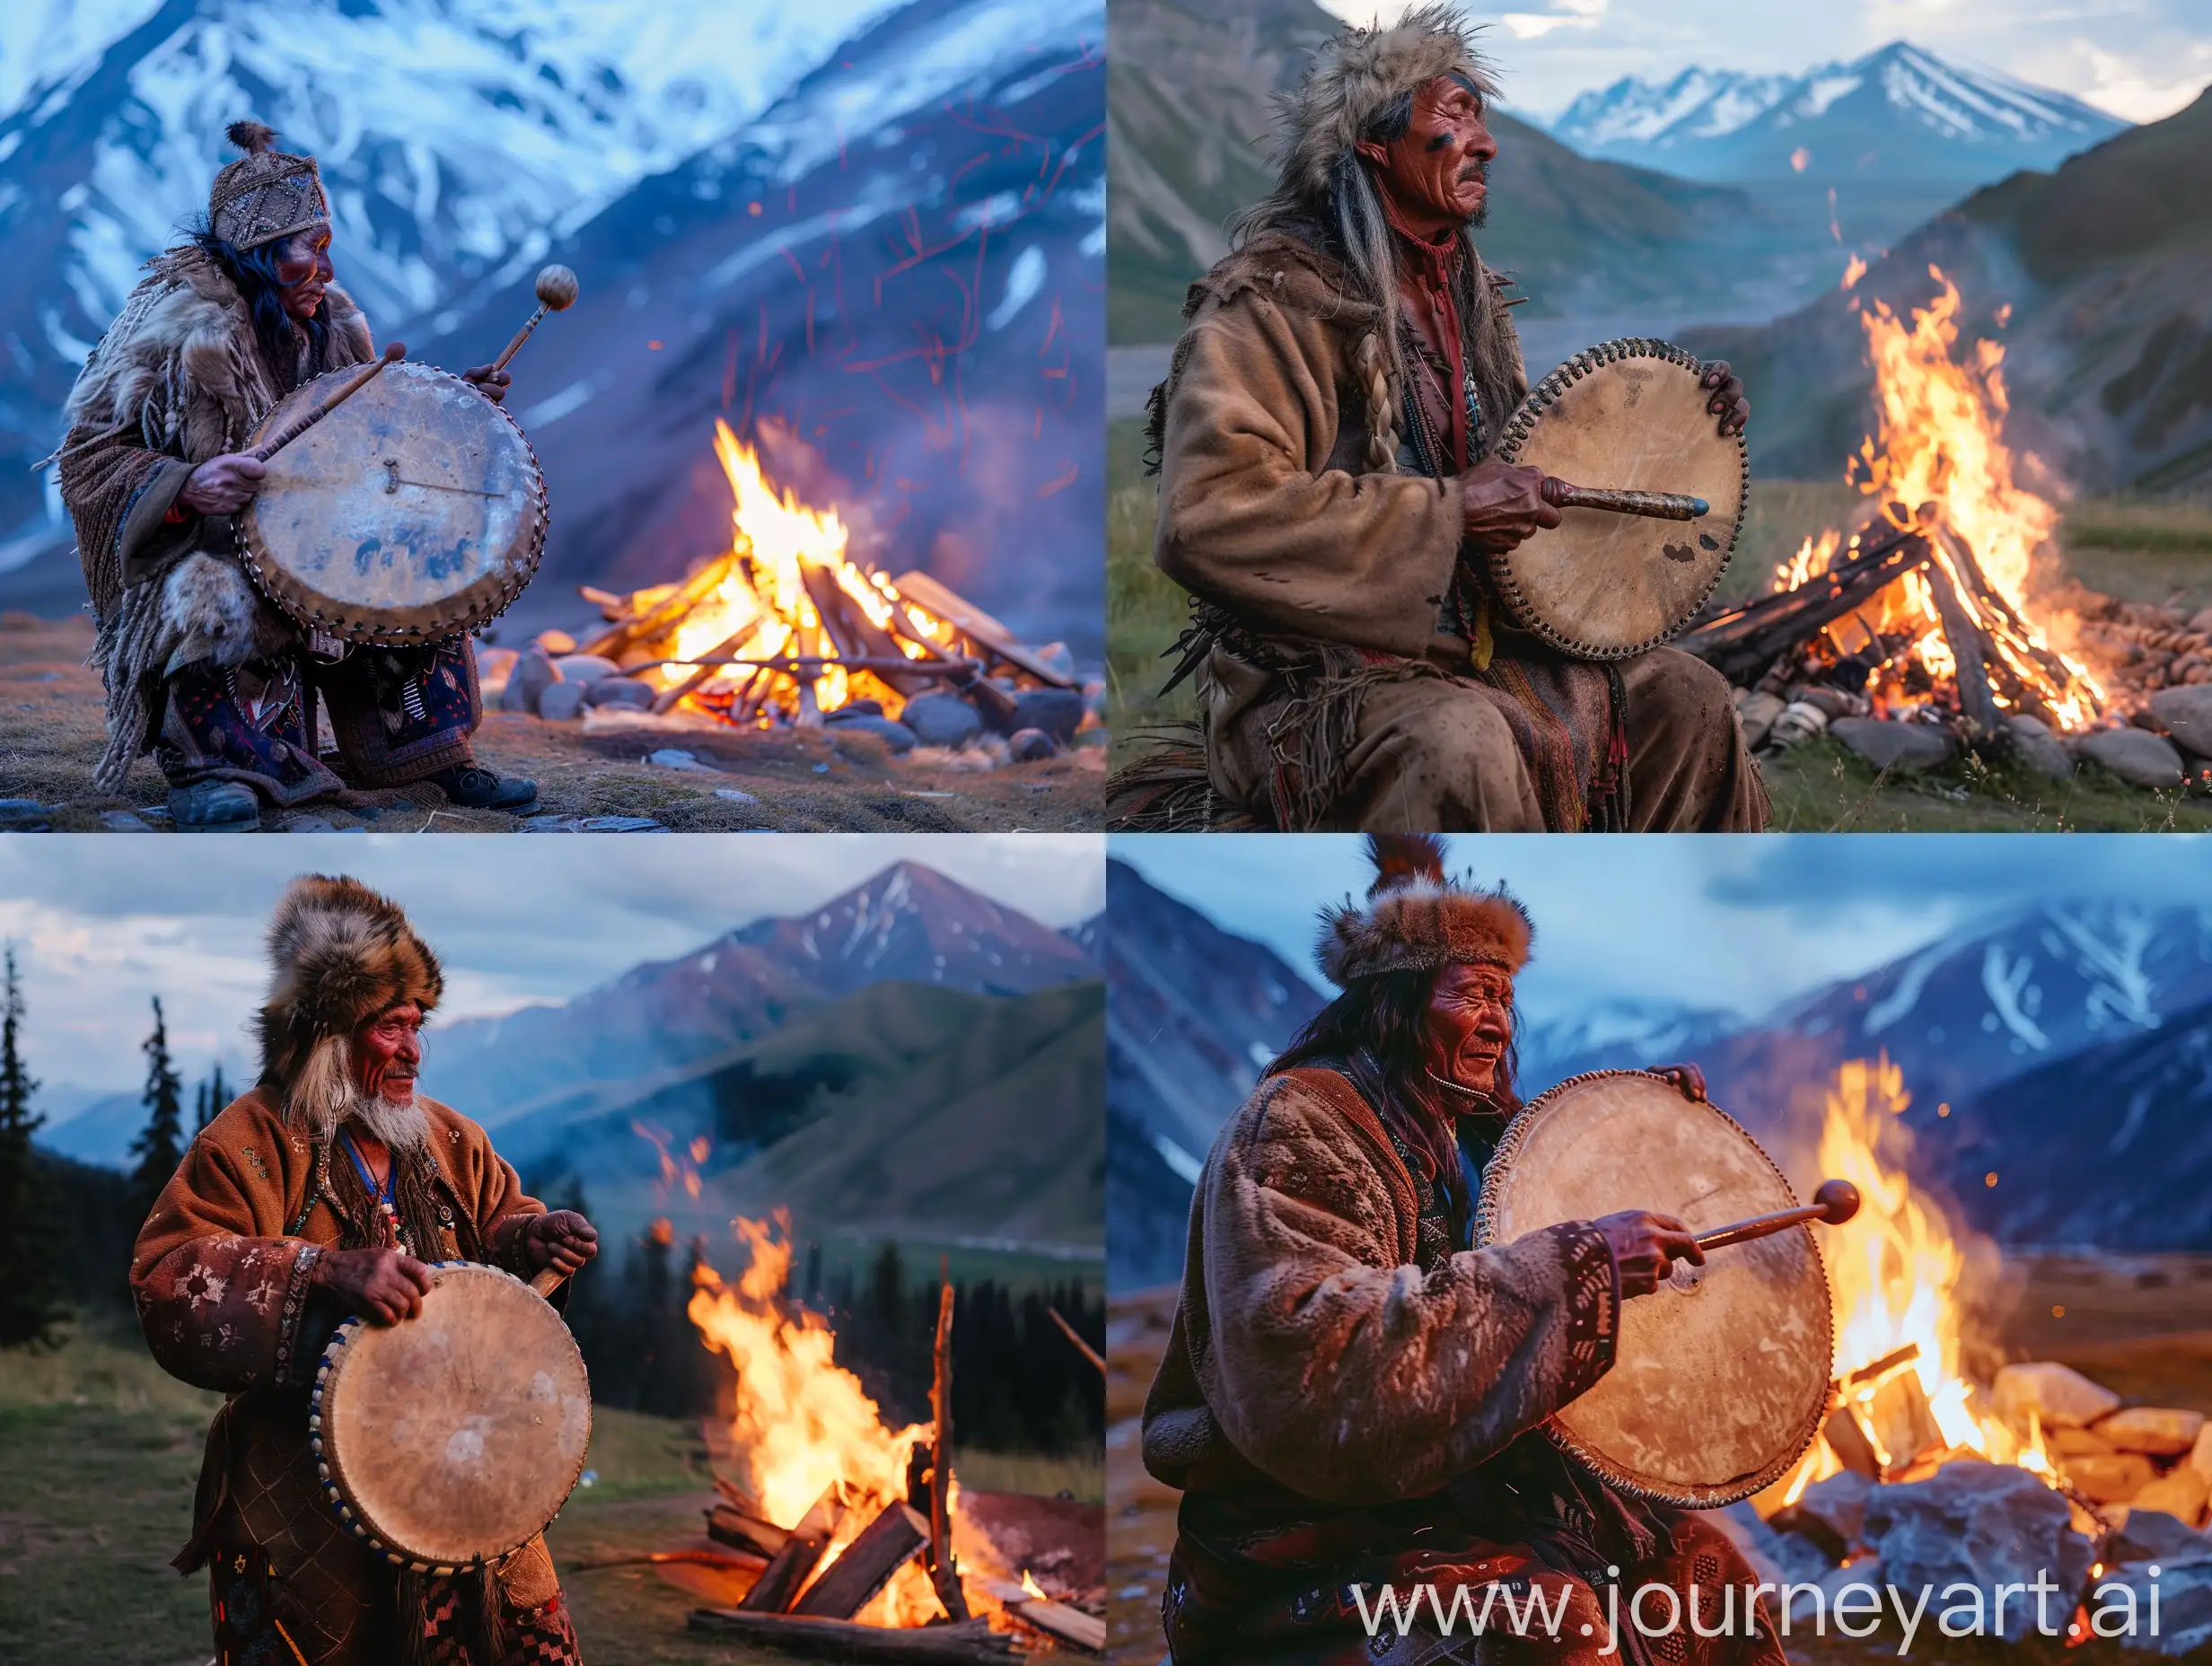 A powerful selkup shaman is drumming his big tambourine in the mountains in the stunning evening by the big bonfire, in a state of trance, ultraHD, shot on Leica, a prize-winning photo